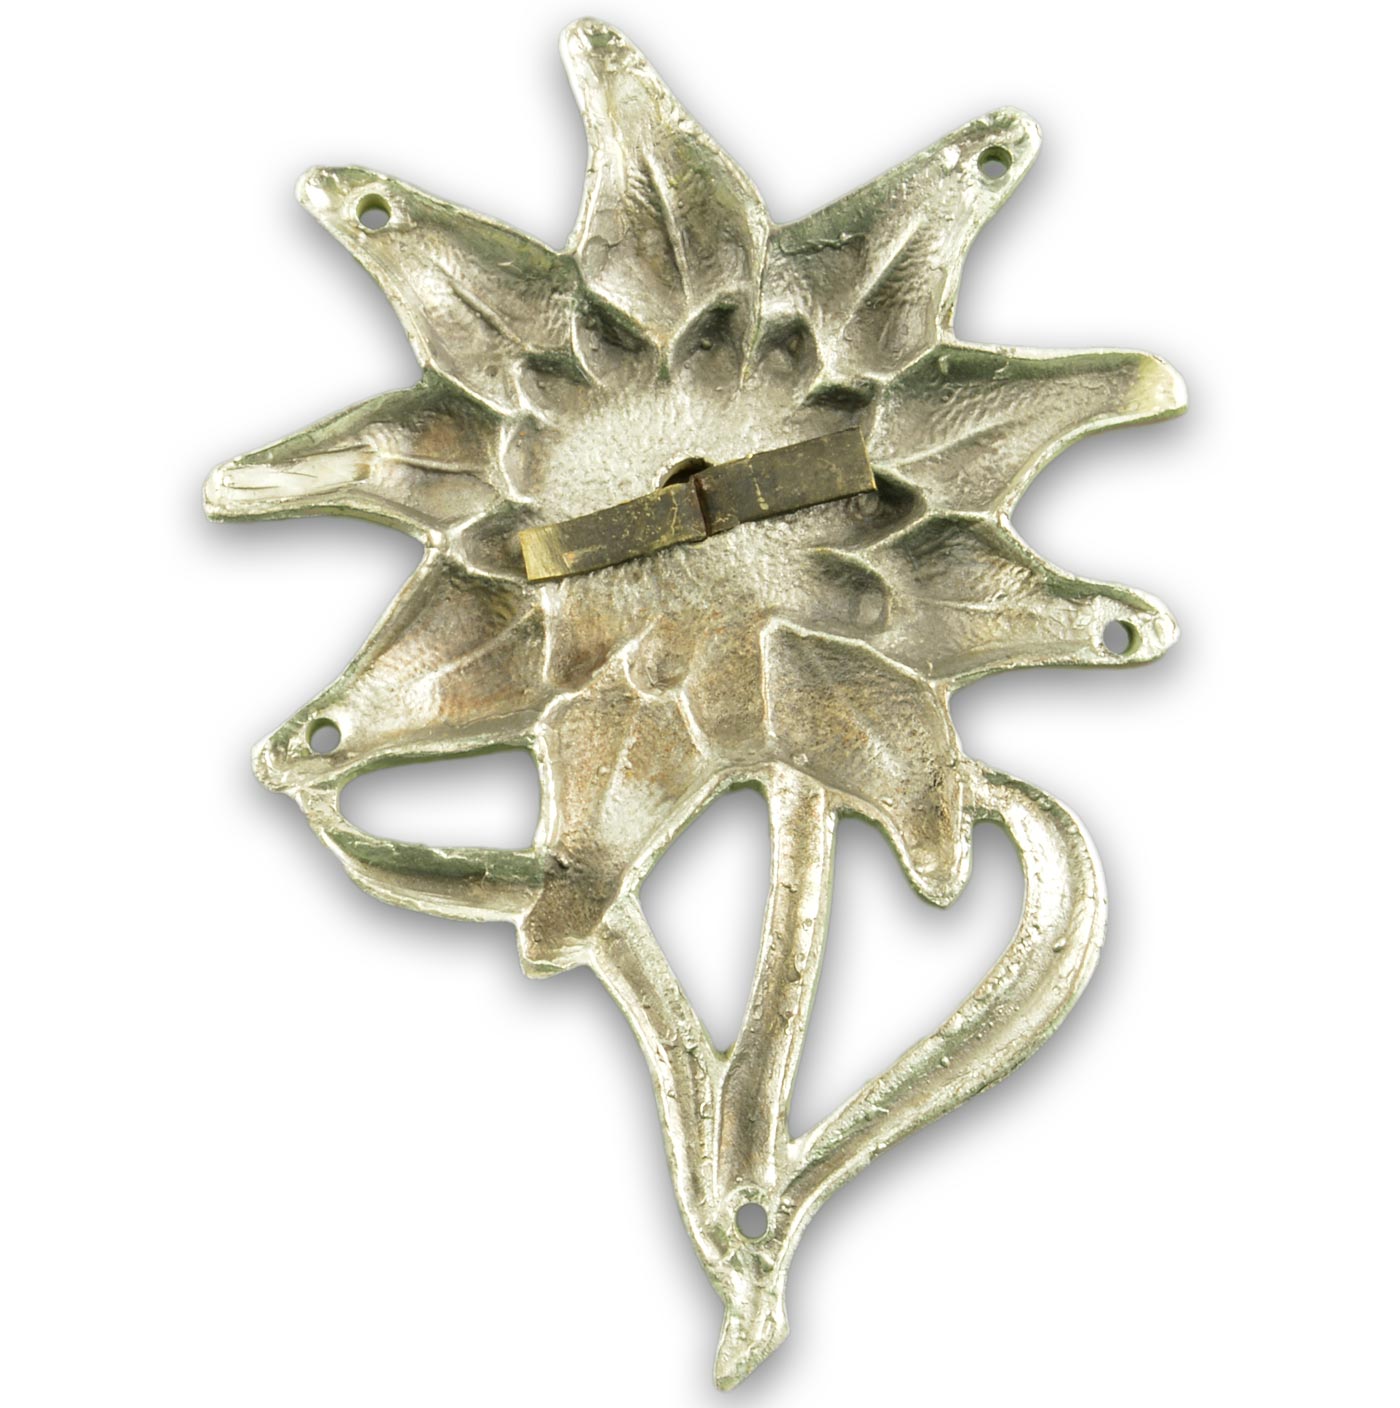 Edelweiss badge. WW2 German military sign. COPY in | favshop